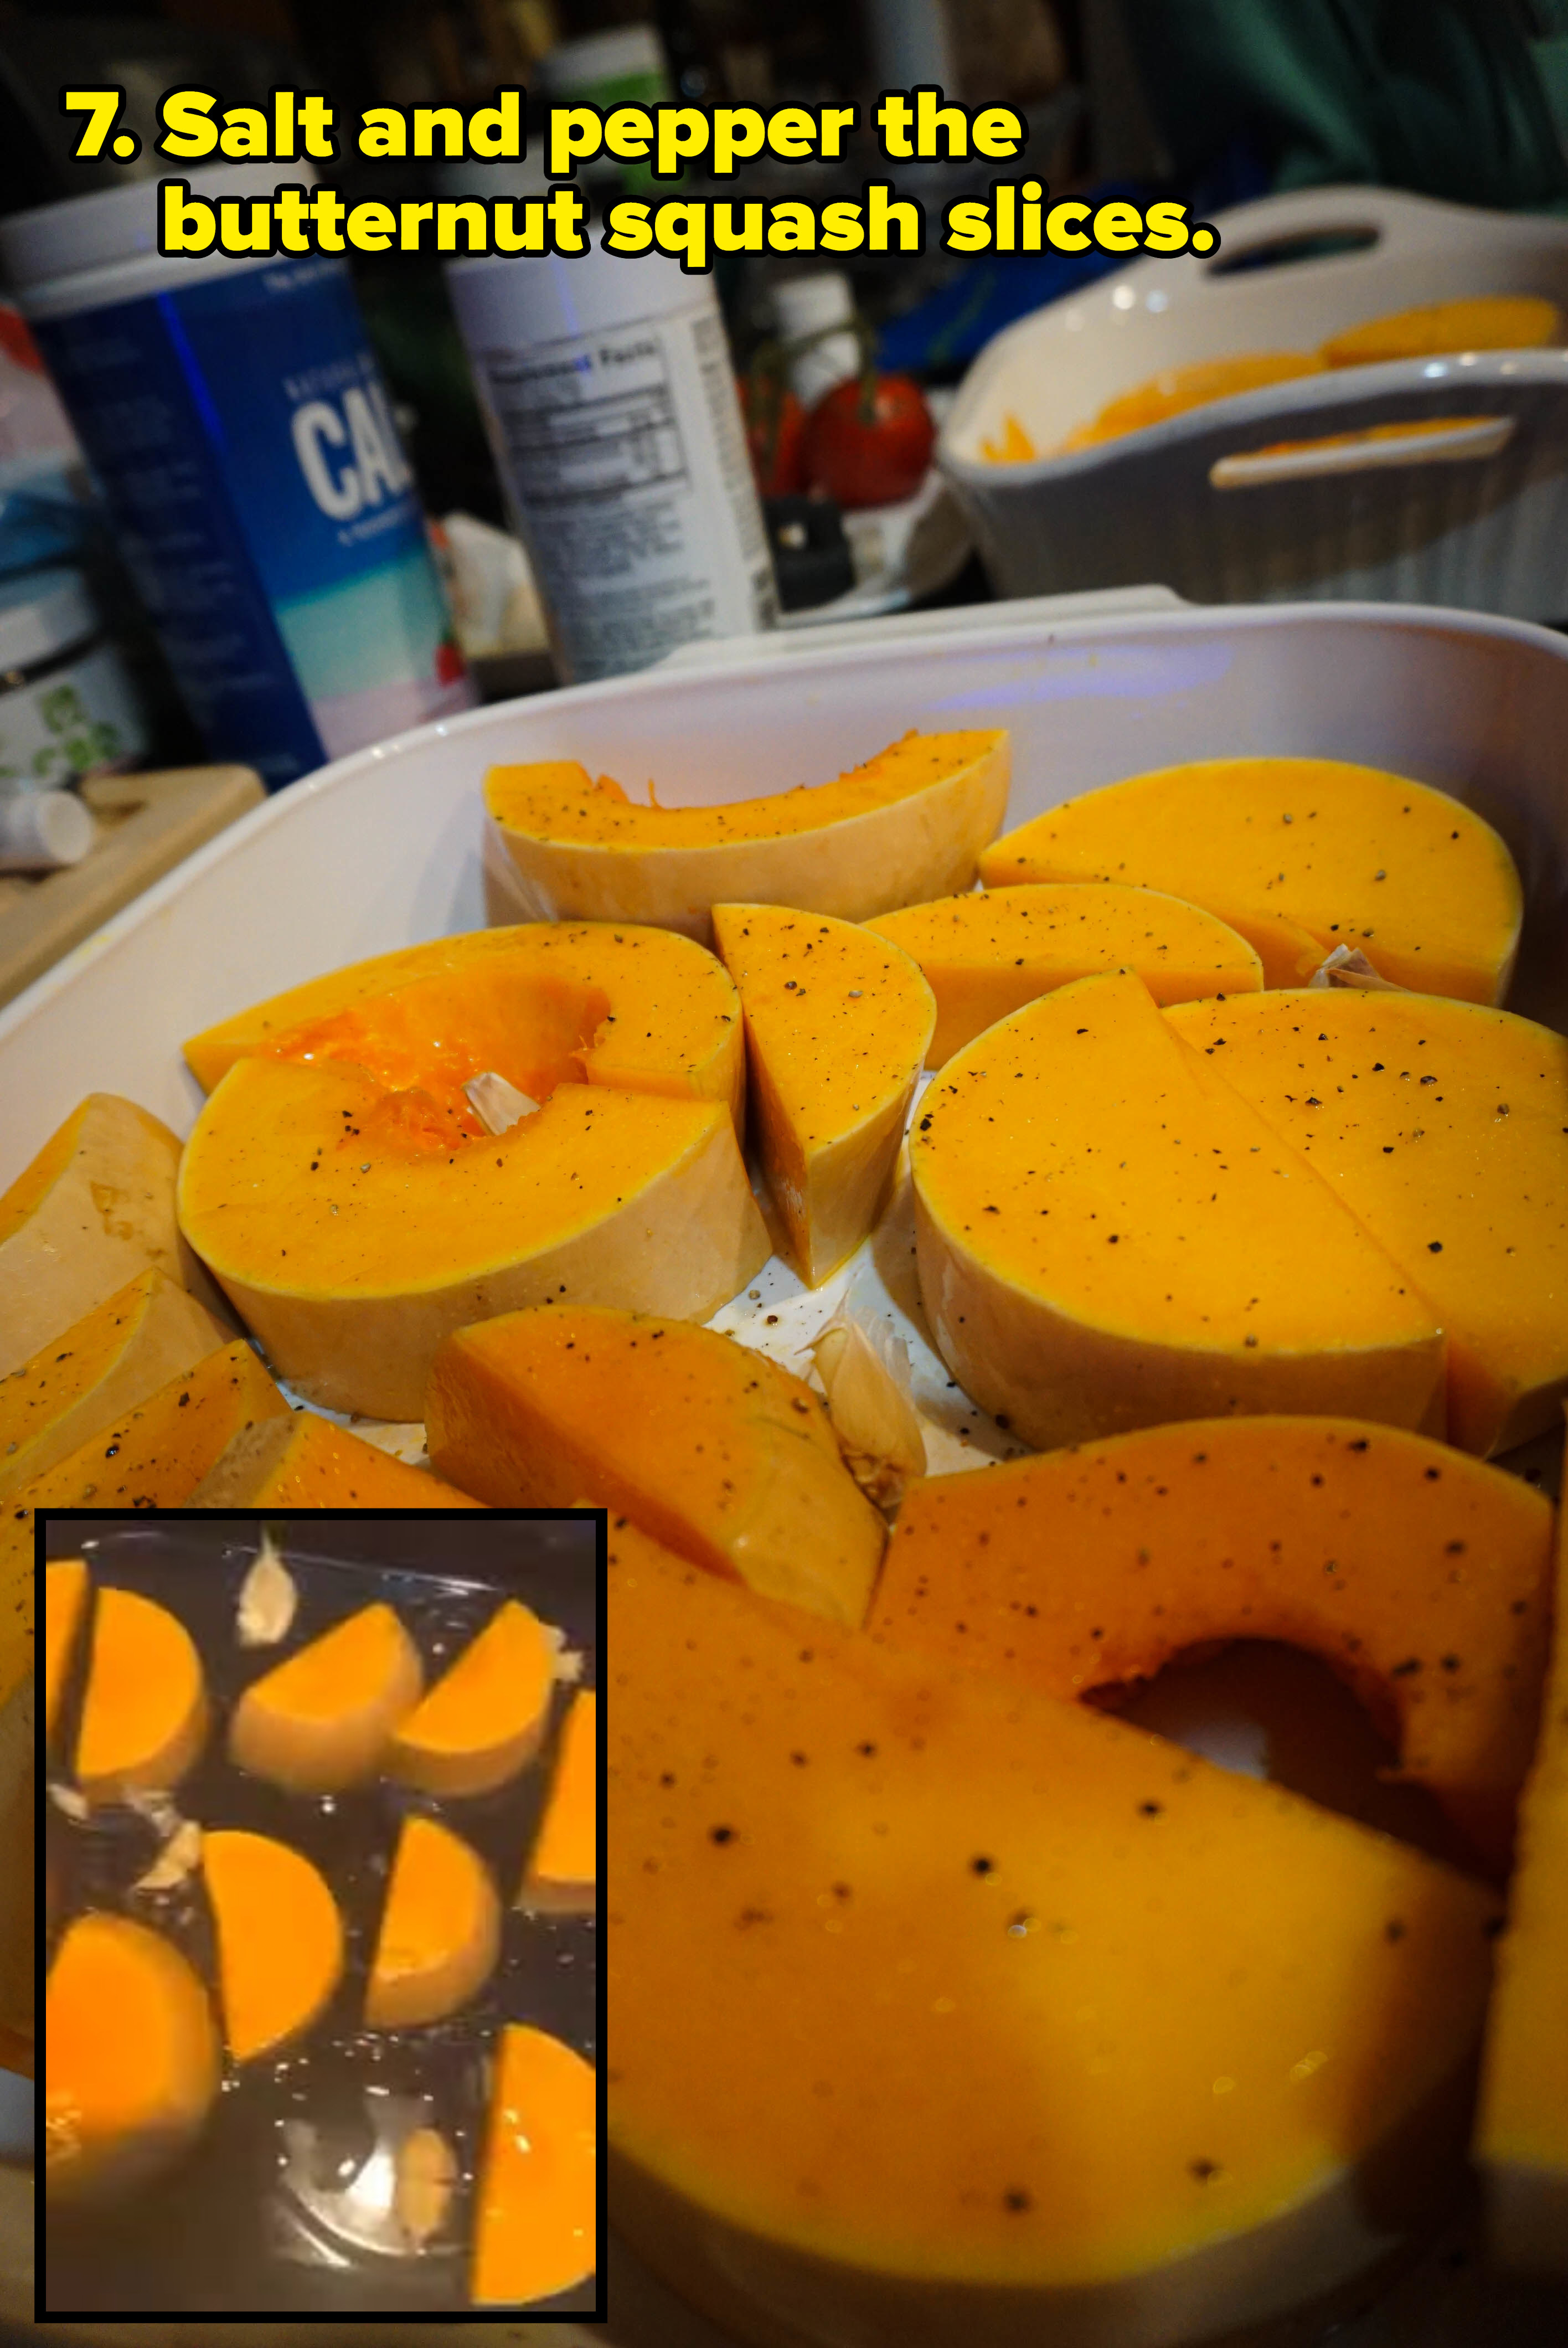 garlic and butternut squash slices covered in oil (inset) sheet pan of butternut squashs lices and garlic